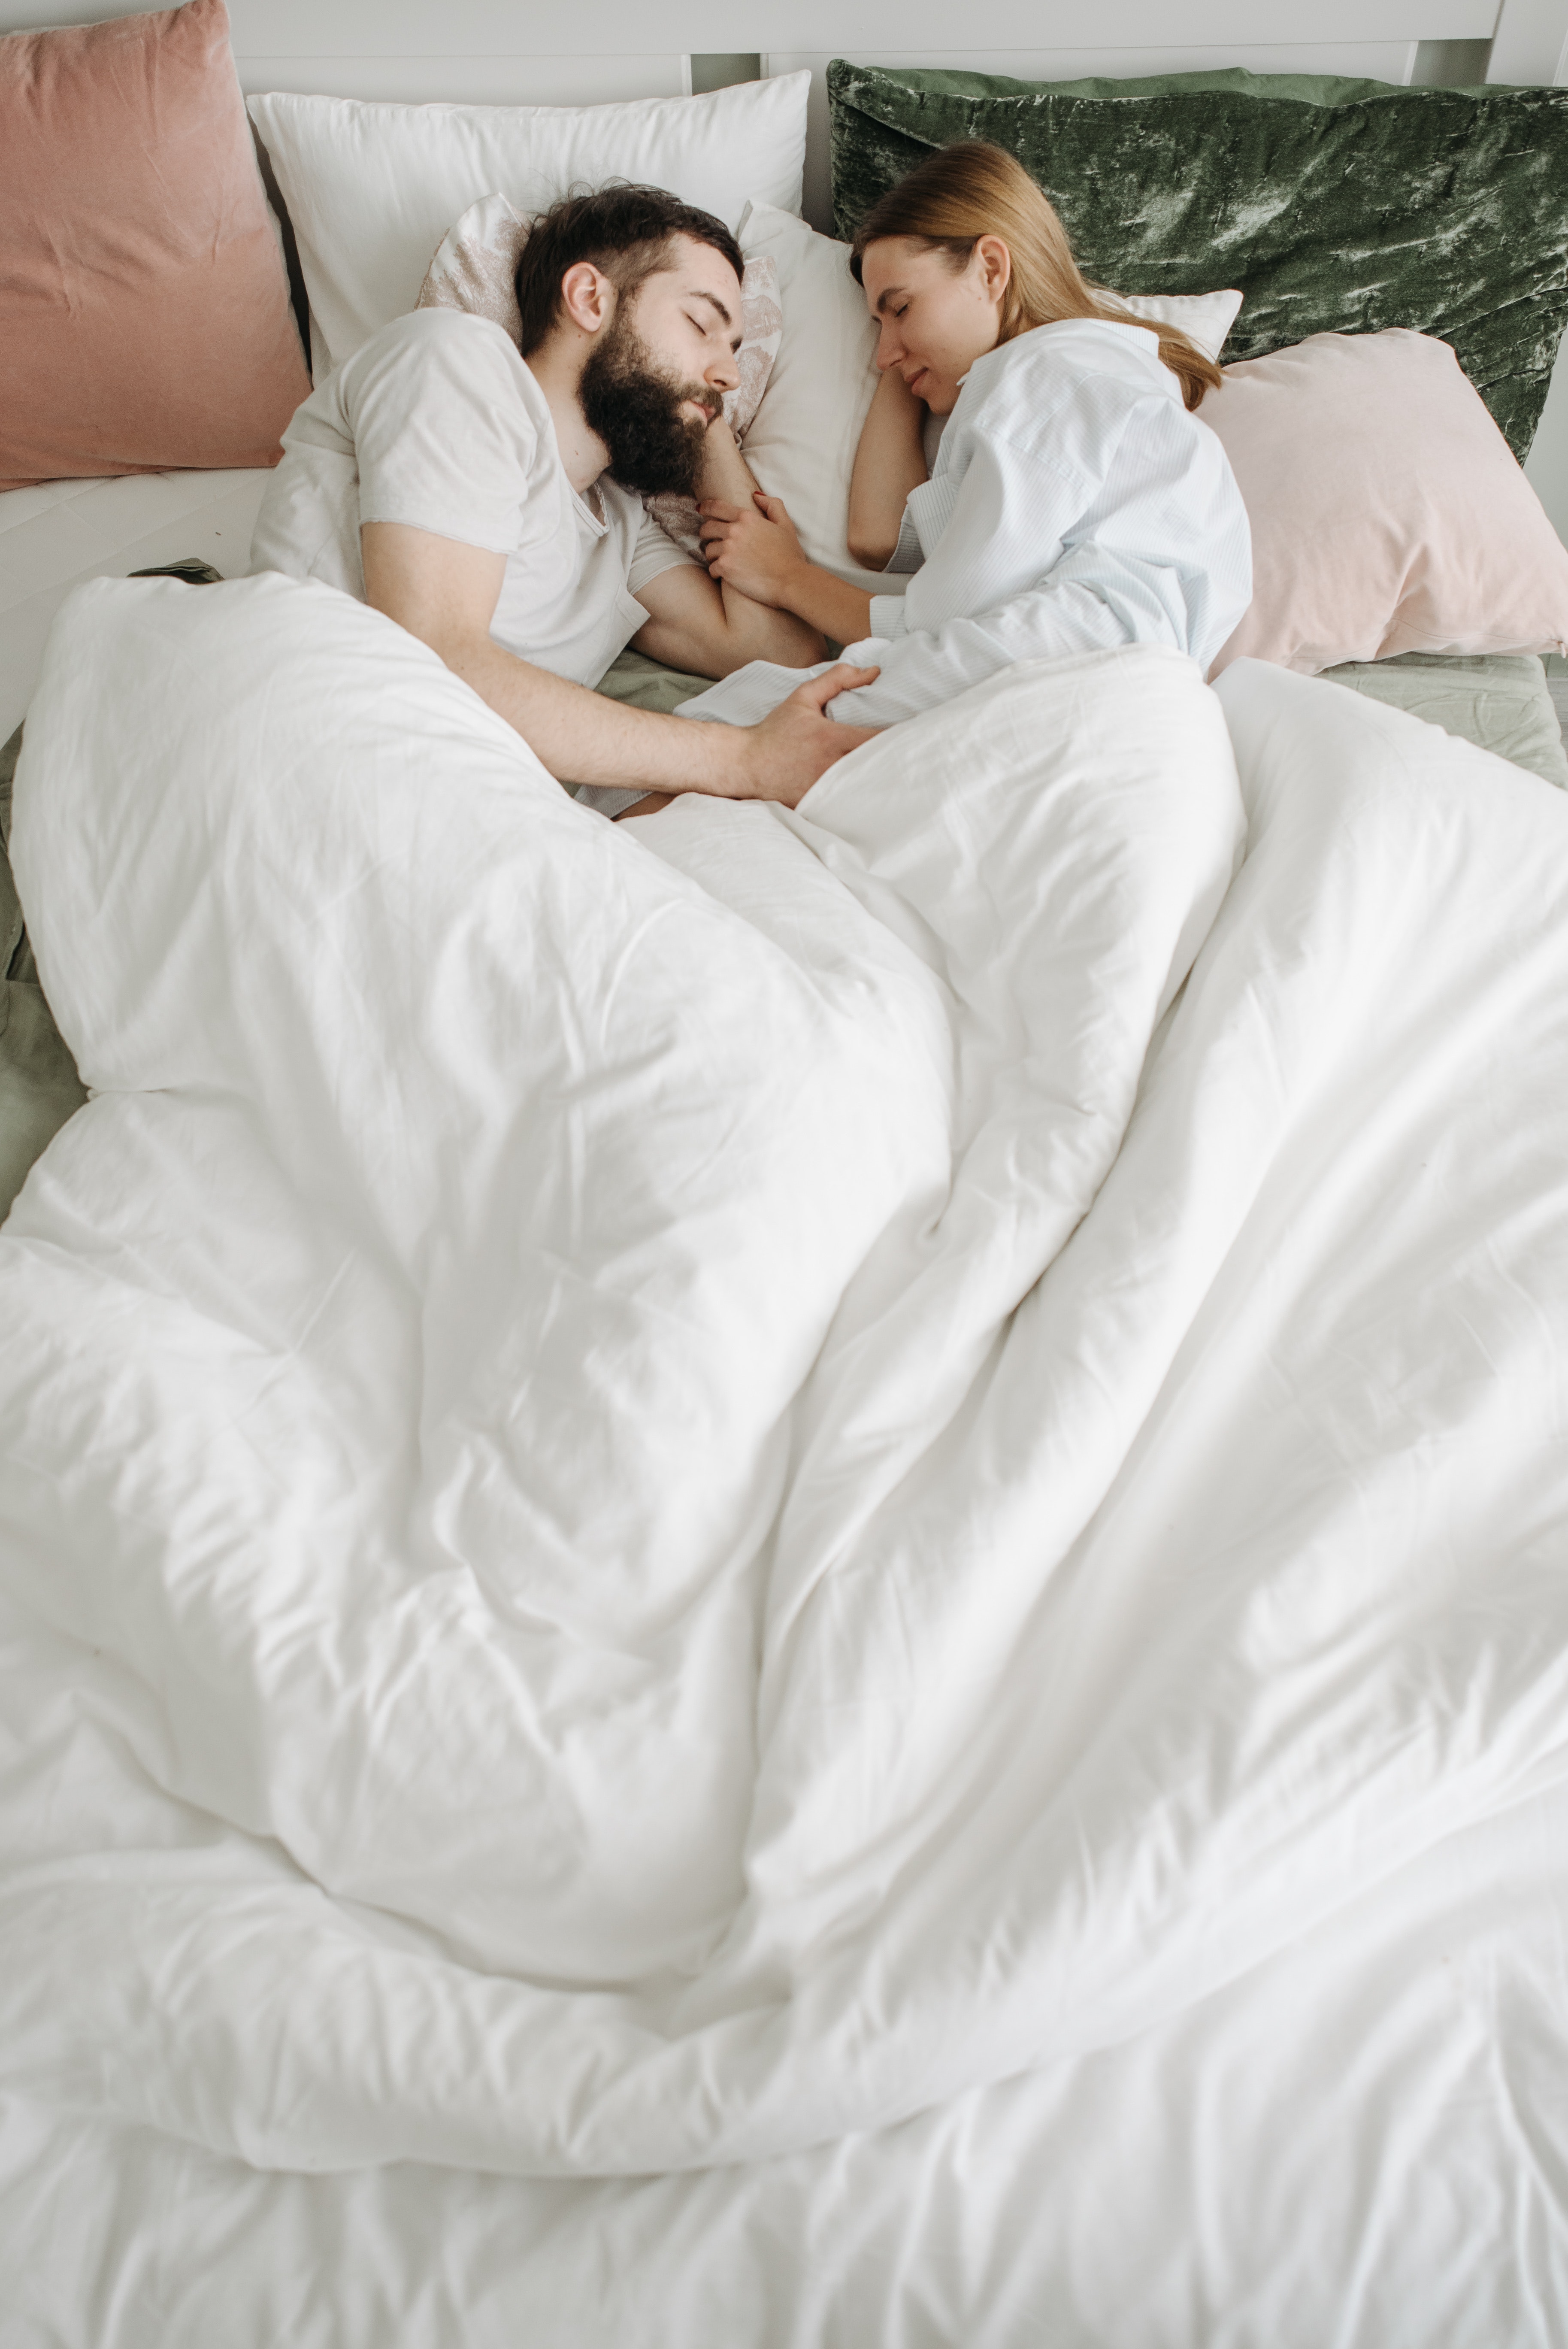 white mixed-gender couple laying in a bed with white and pink pillows and a white blanket, laying facing each other and with their legs touching under the blankets